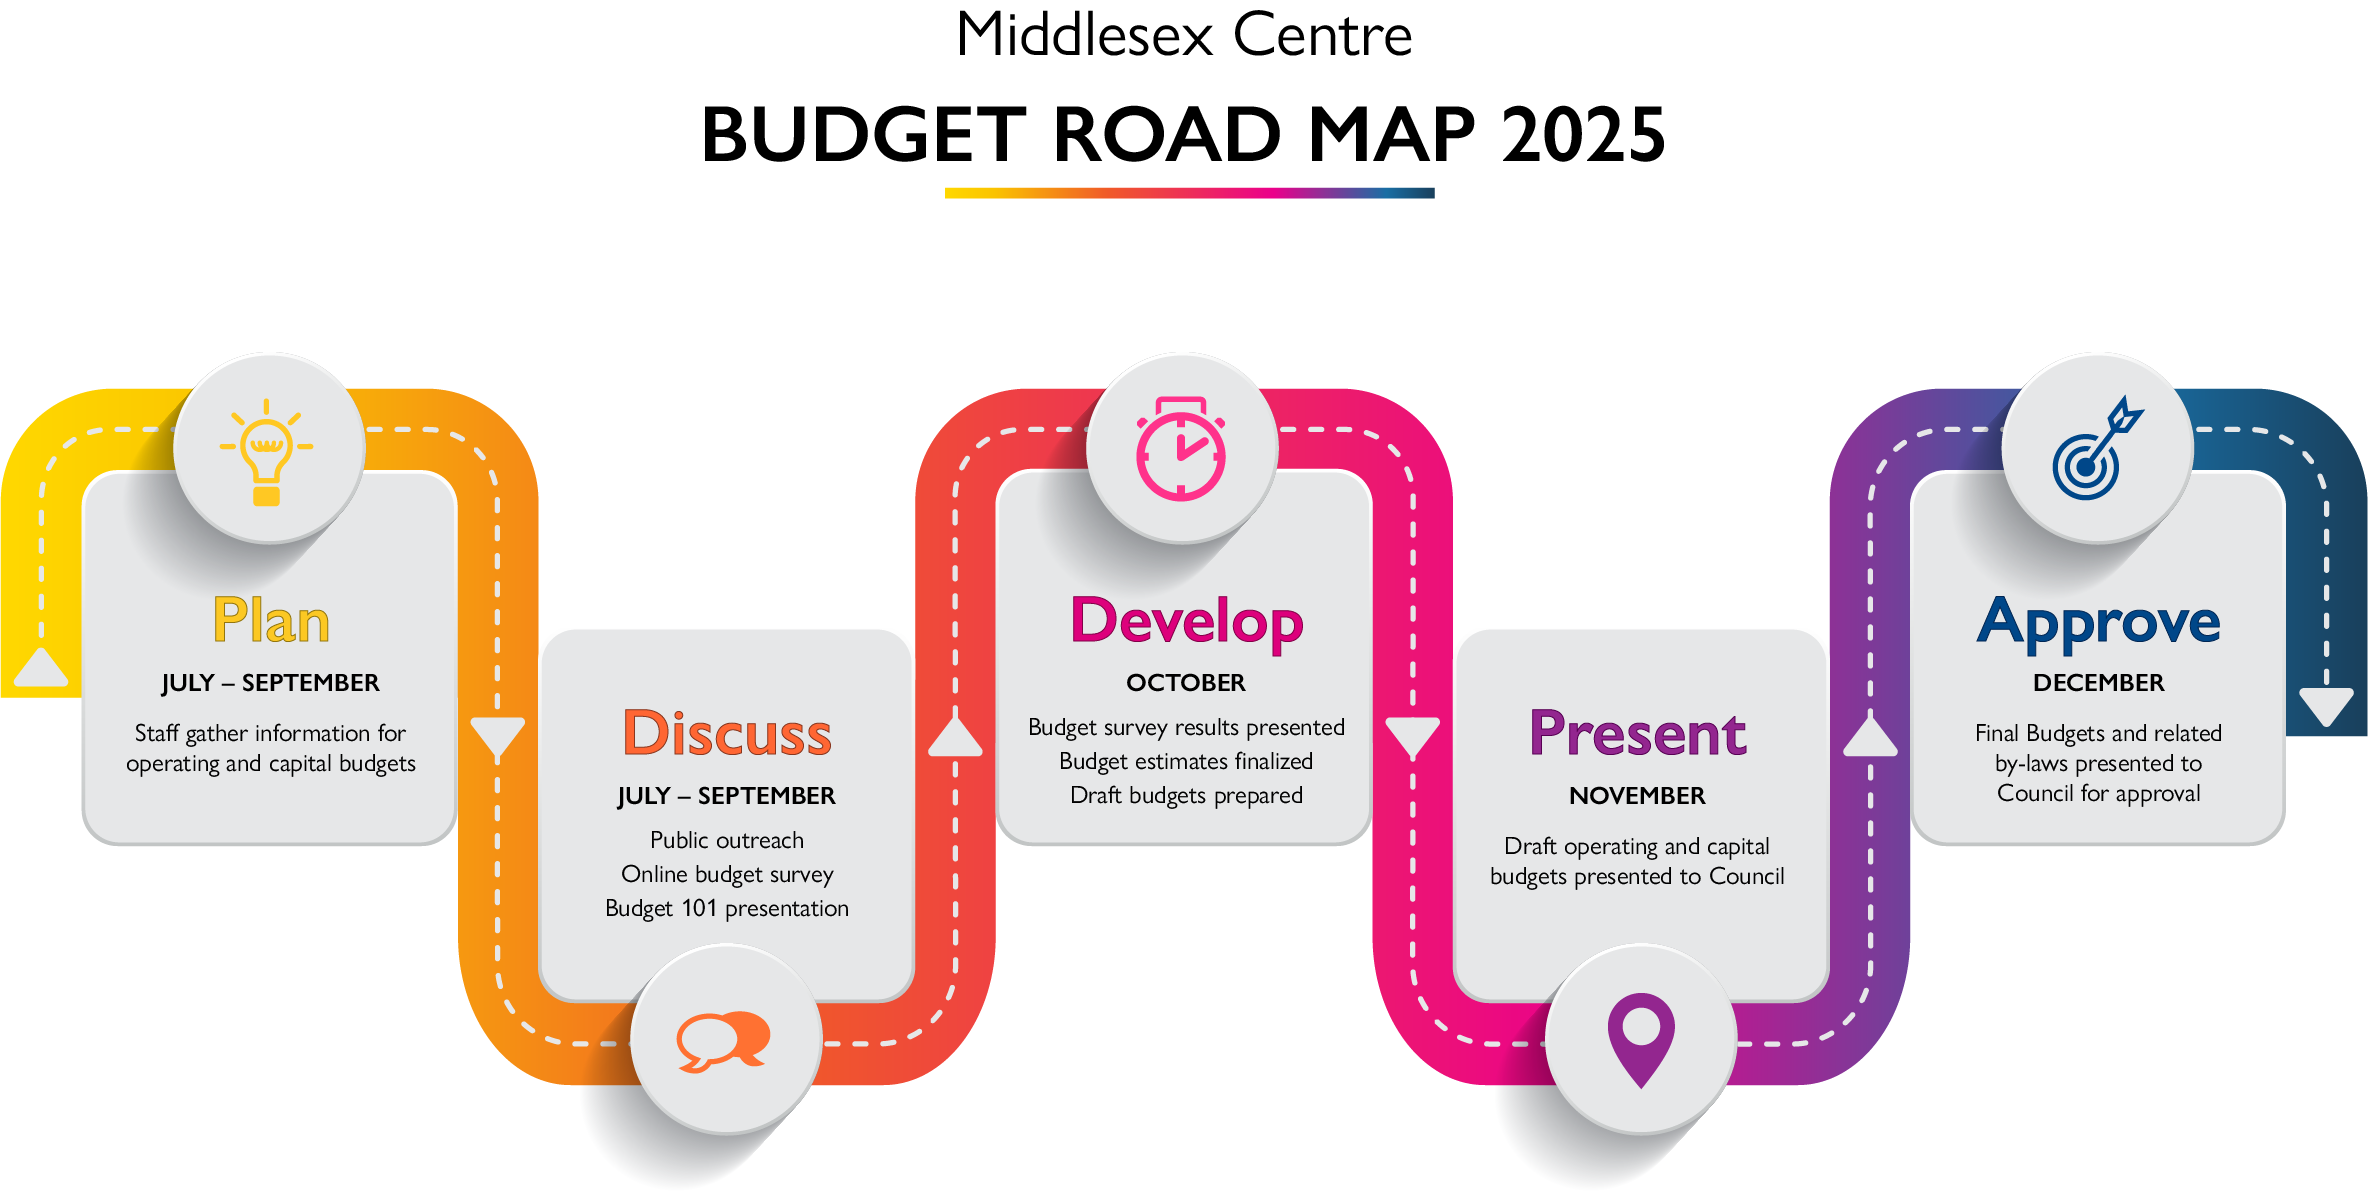 Middlesex Centre Budget Road Map 2025